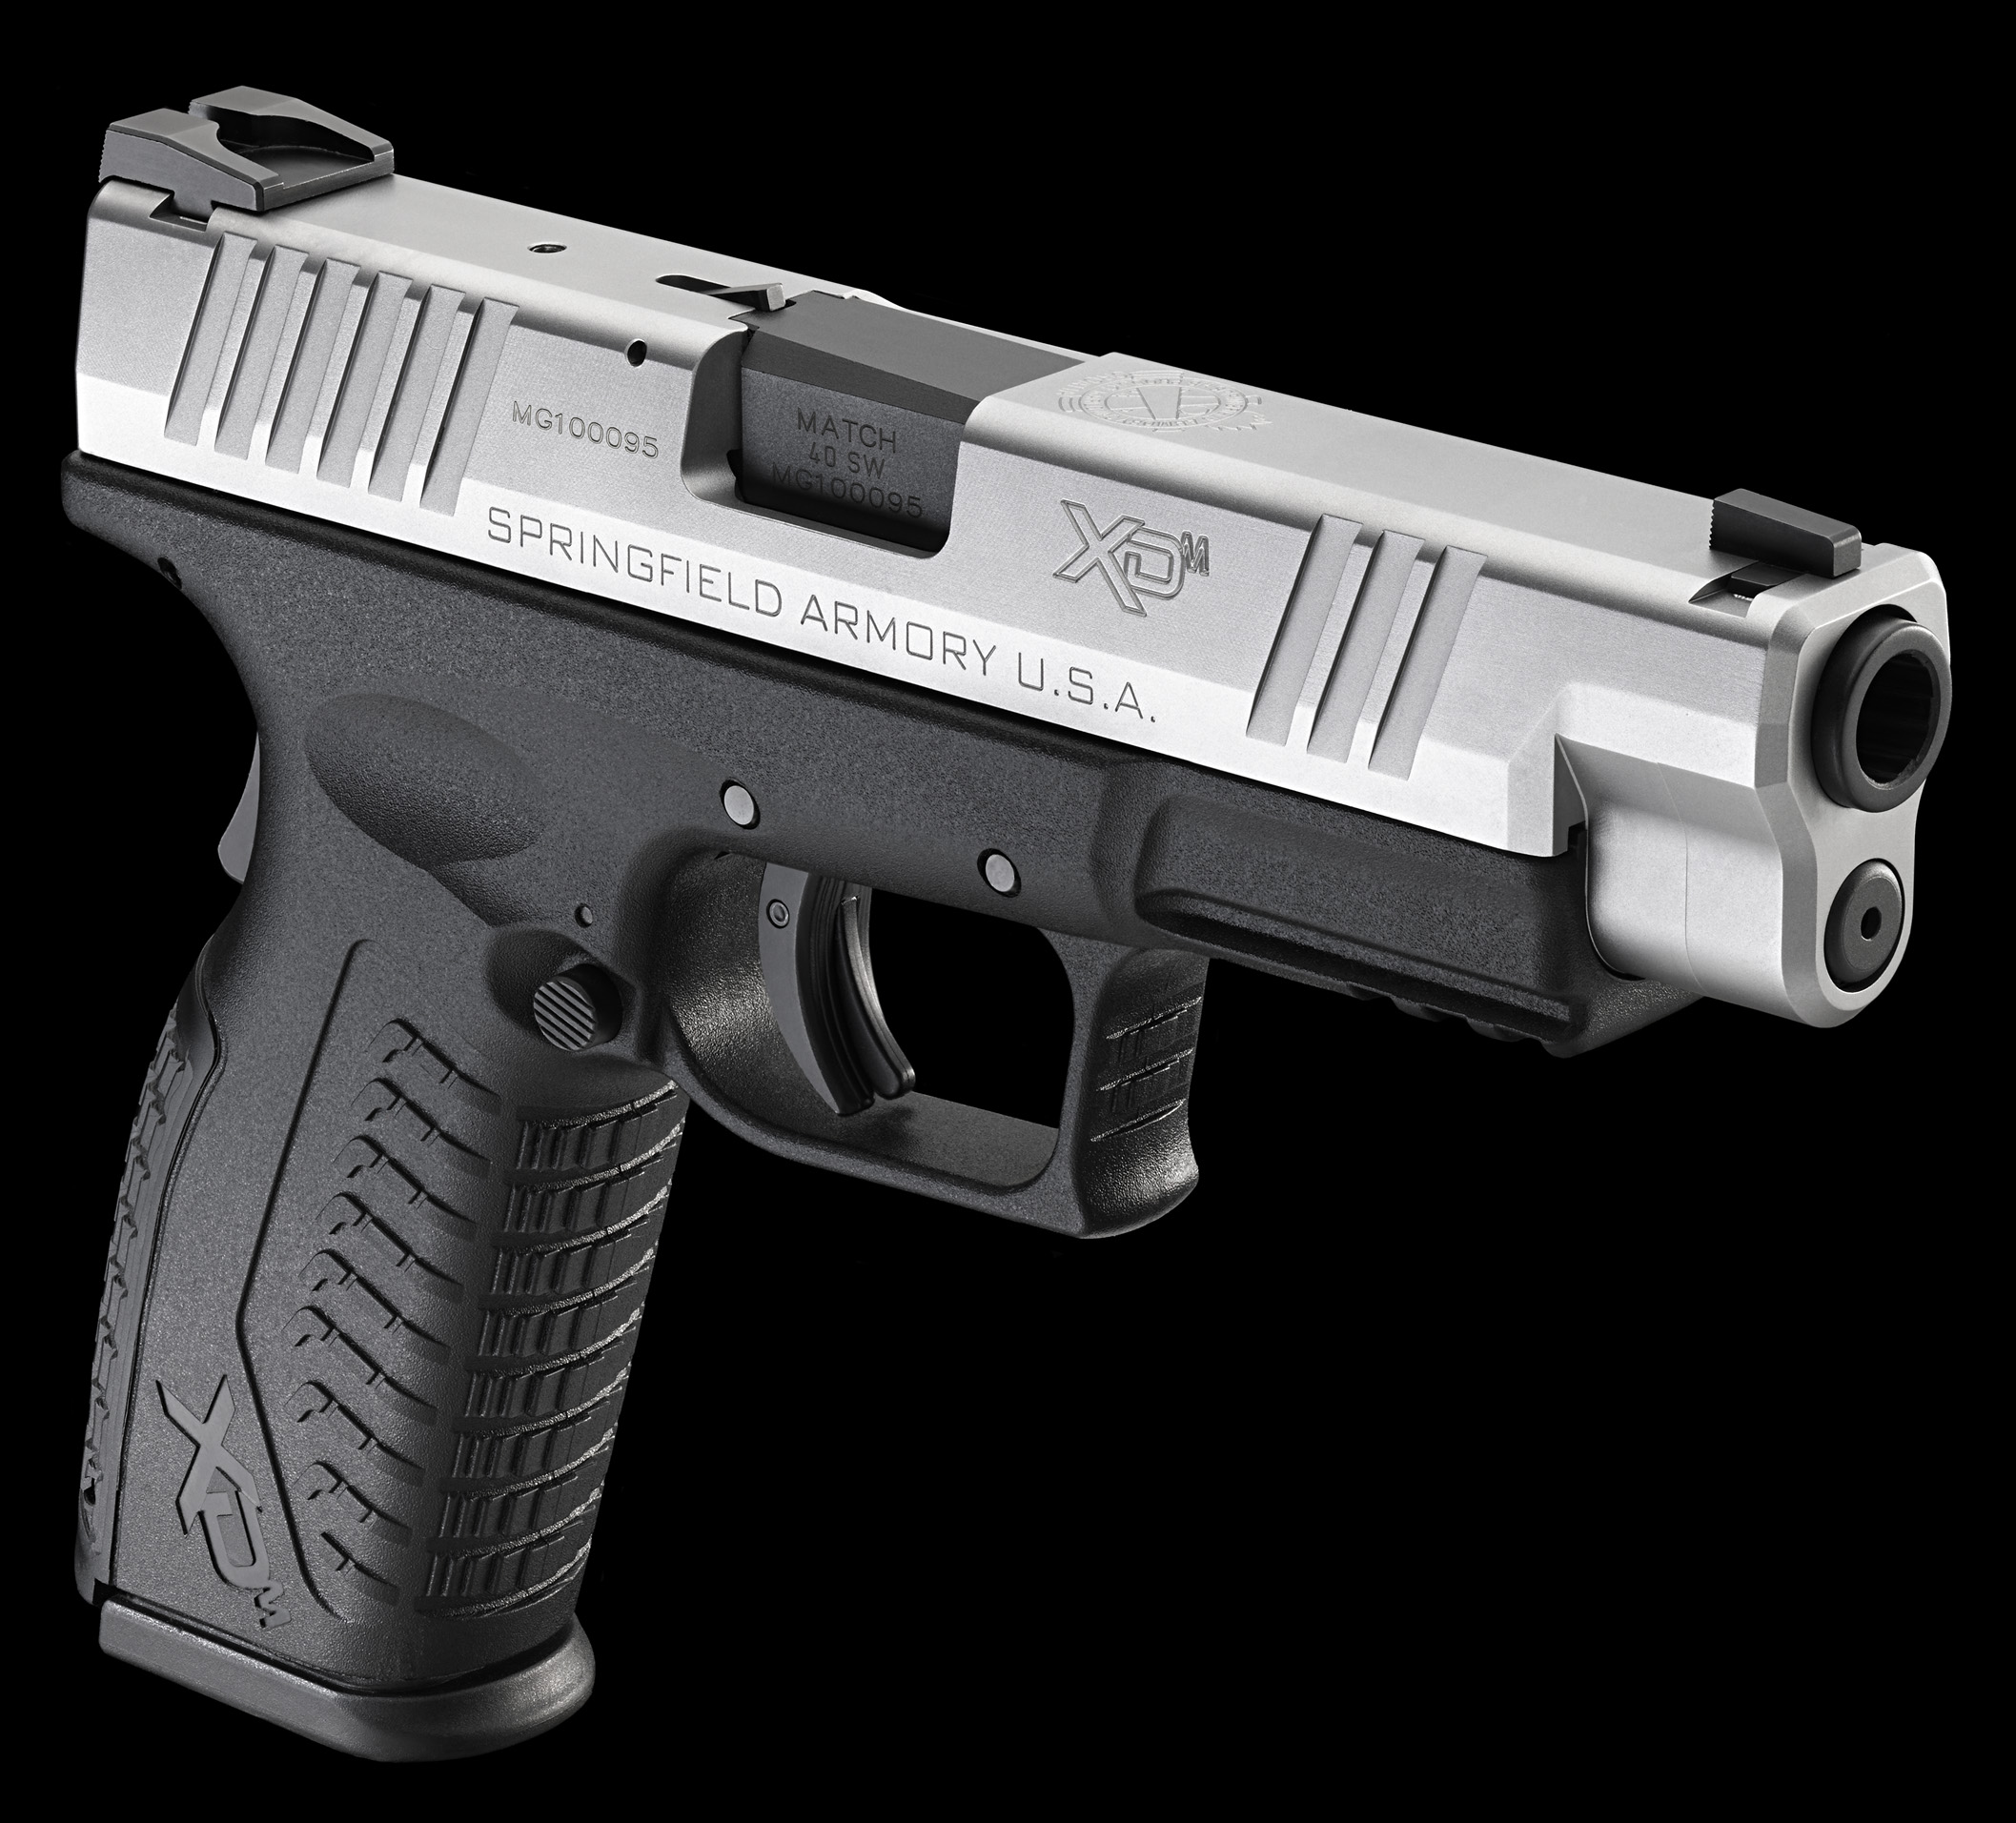 1 Springfield Armory Xdm HD Wallpapers | Backgrounds - Wallpaper Abyss